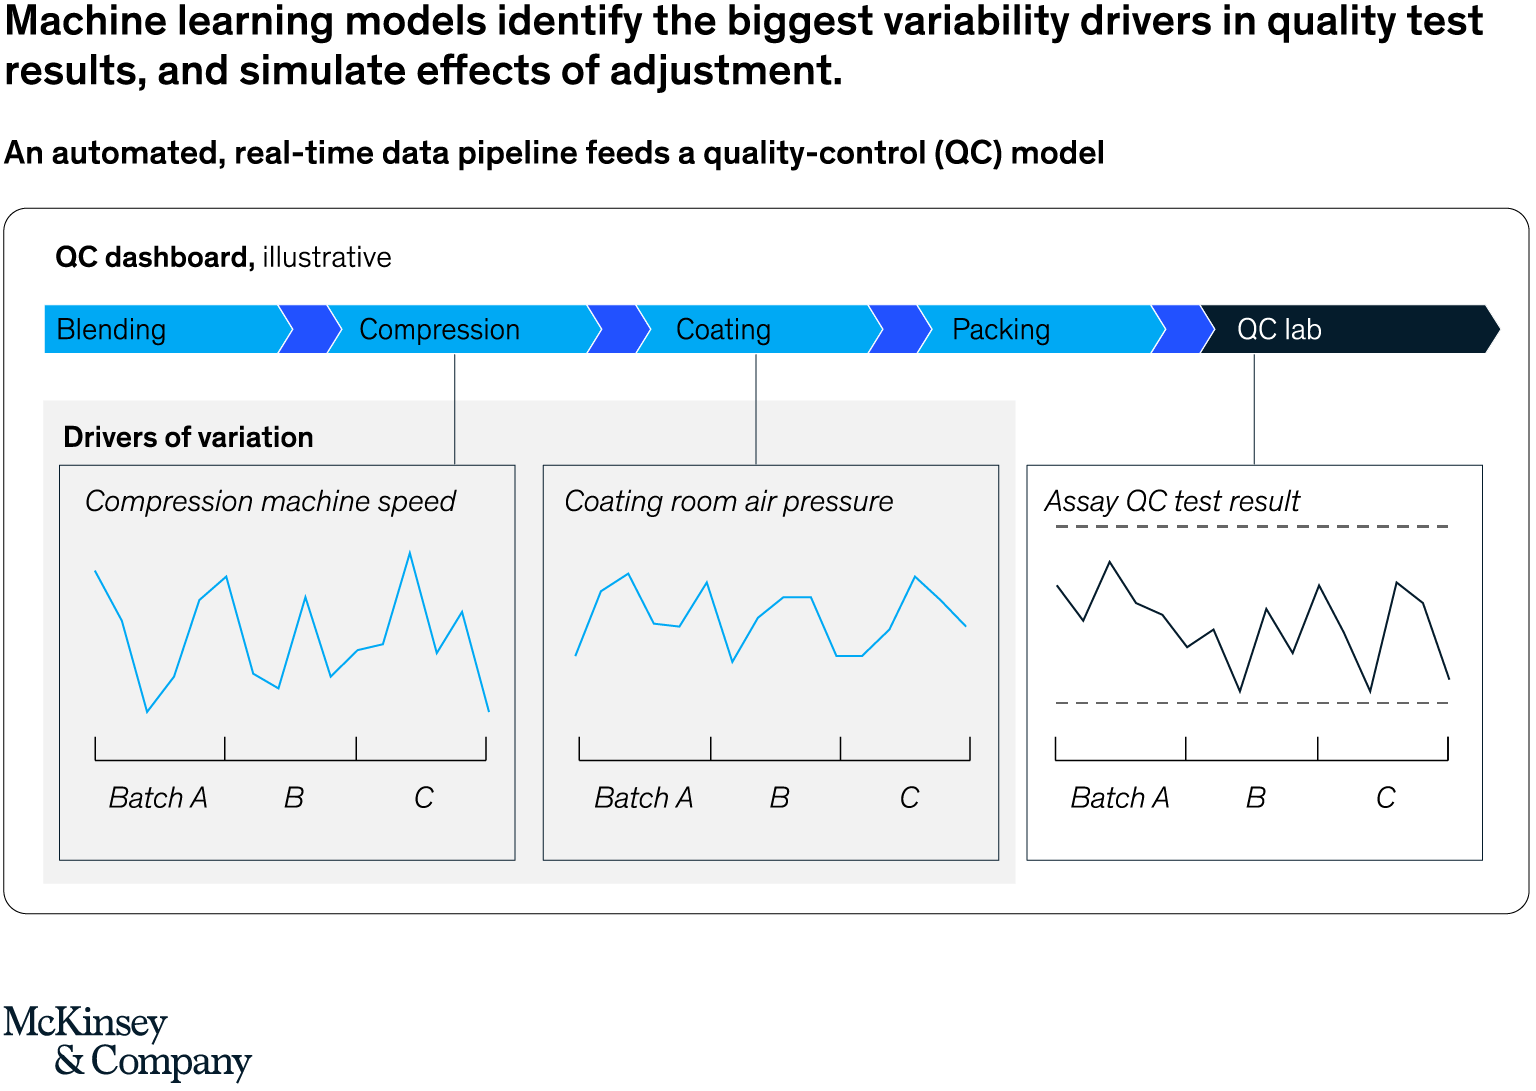 Machine learning models identify the biggest variability drivers in quality test results, and simulate effects of adjustment